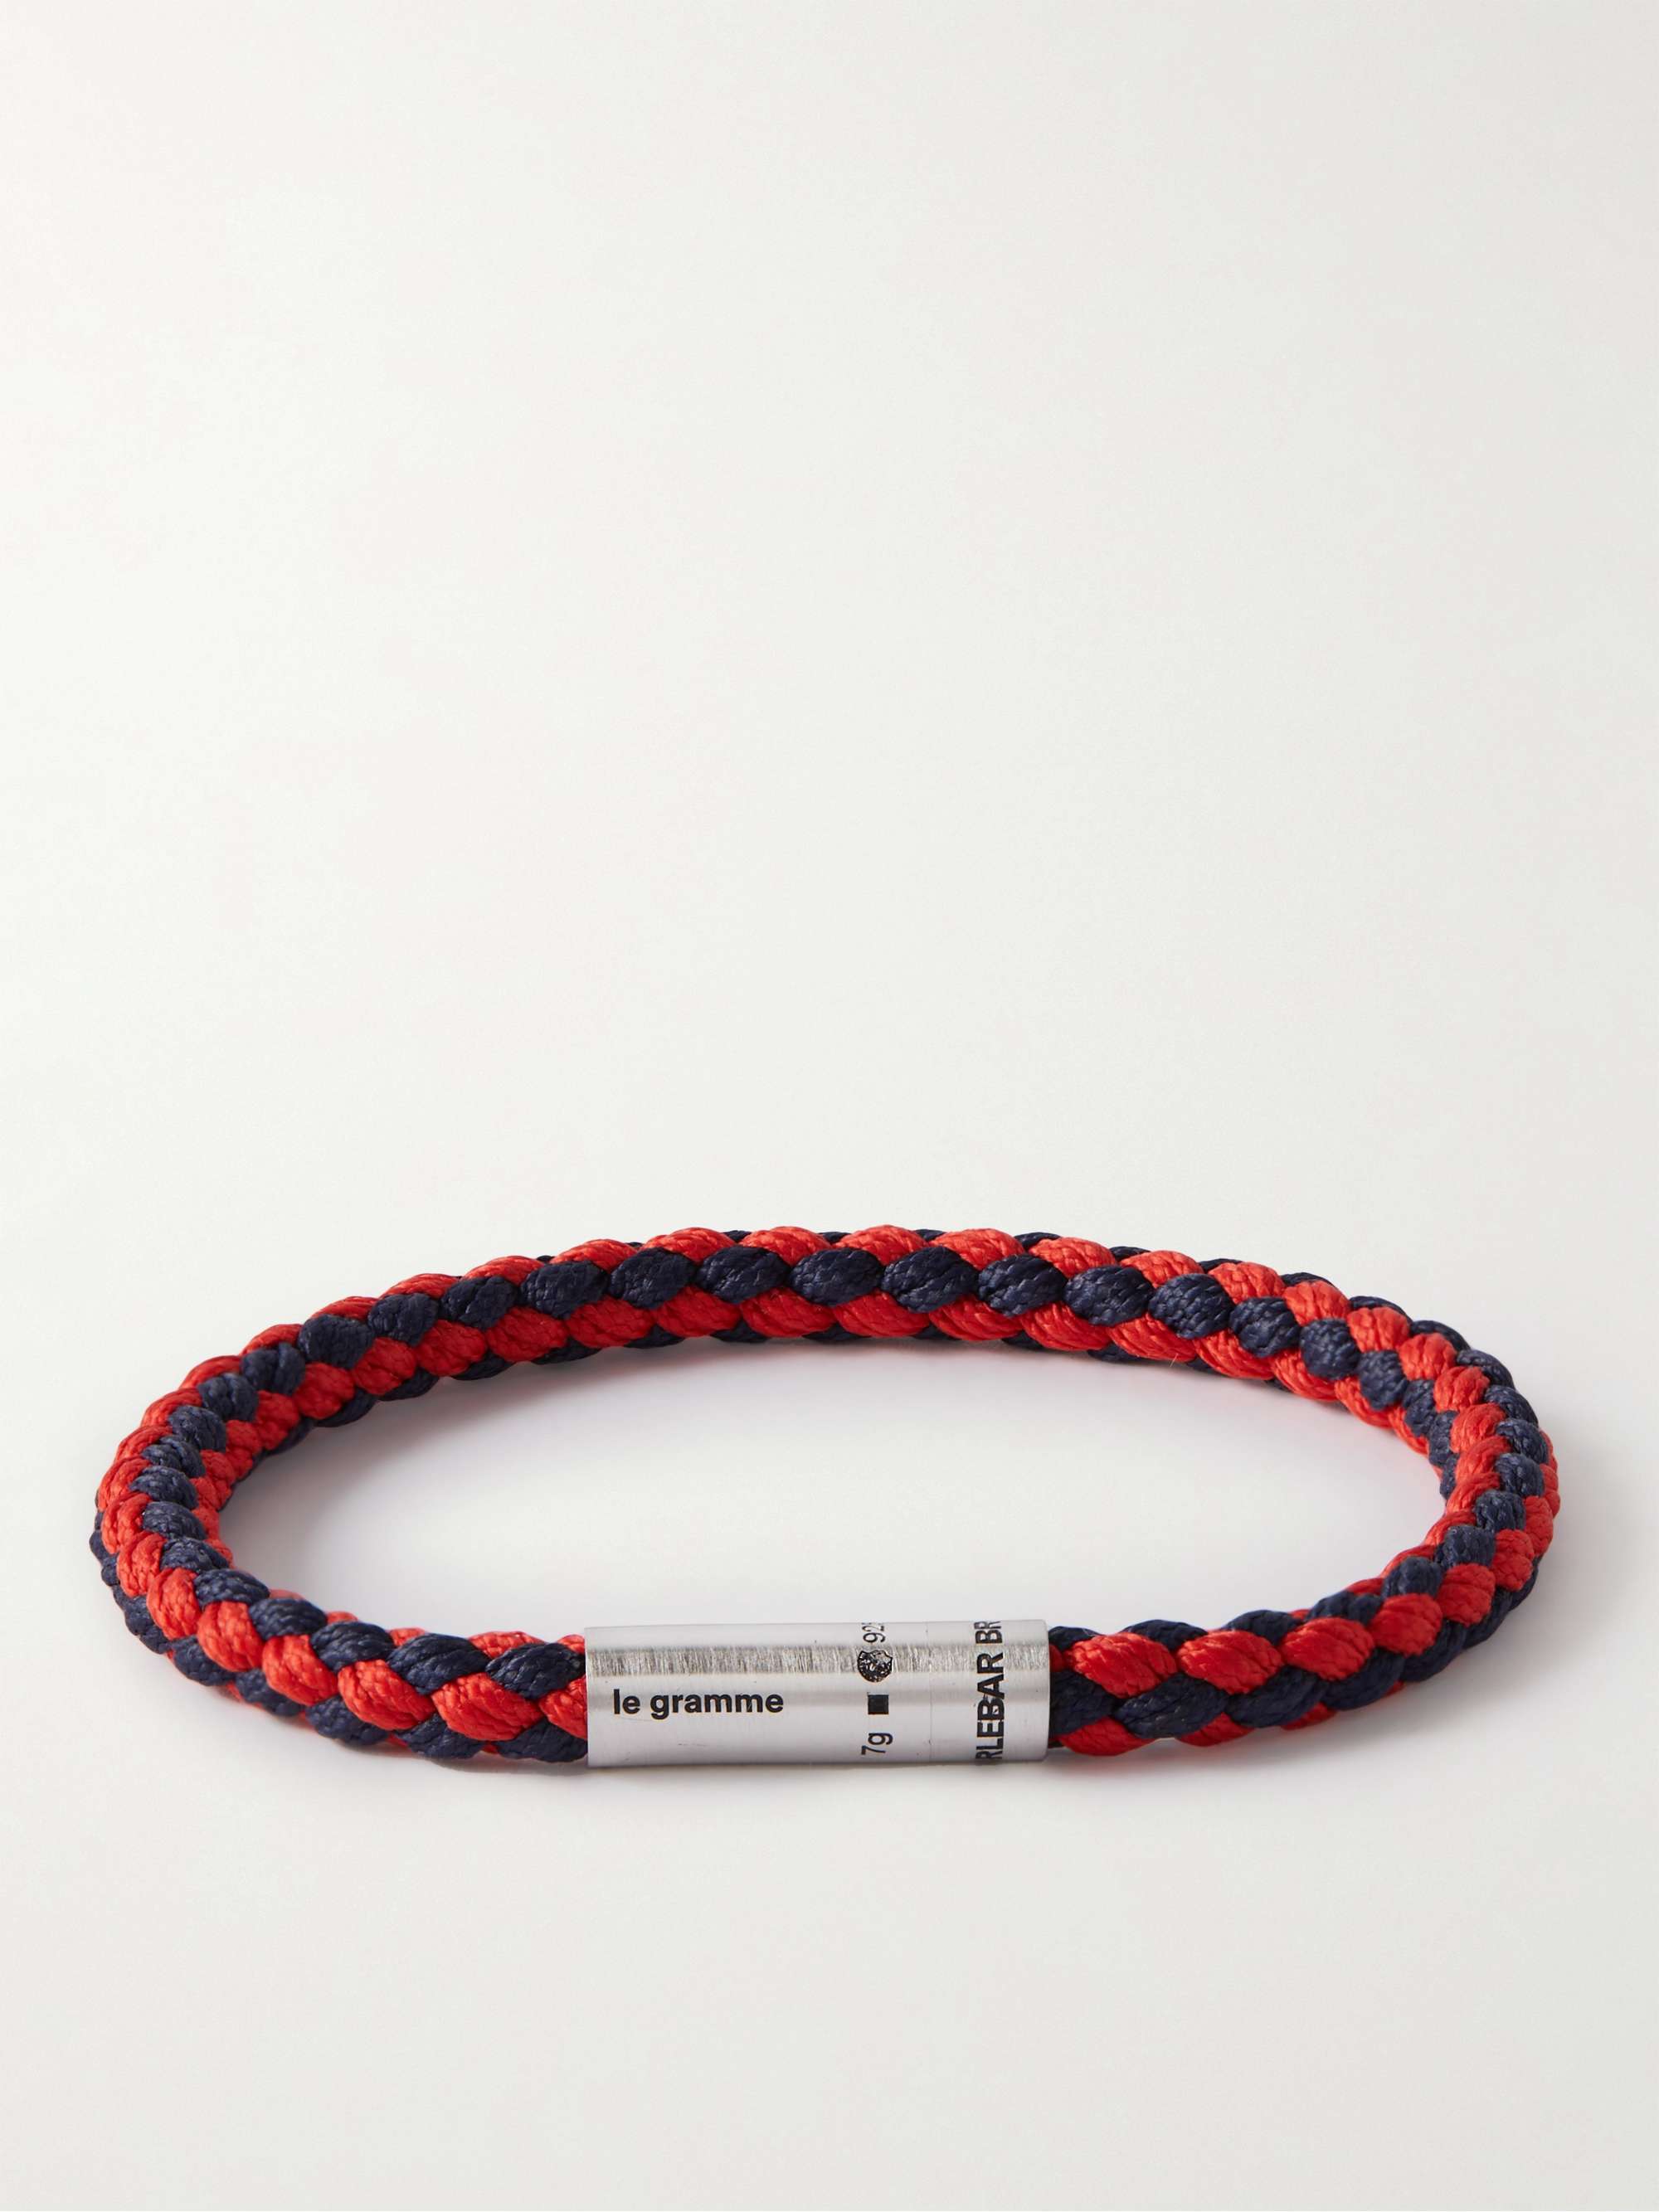 Red + Orlebar Brown 7g Woven Cord and Sterling Silver Bracelet | LE GRAMME  | MR PORTER